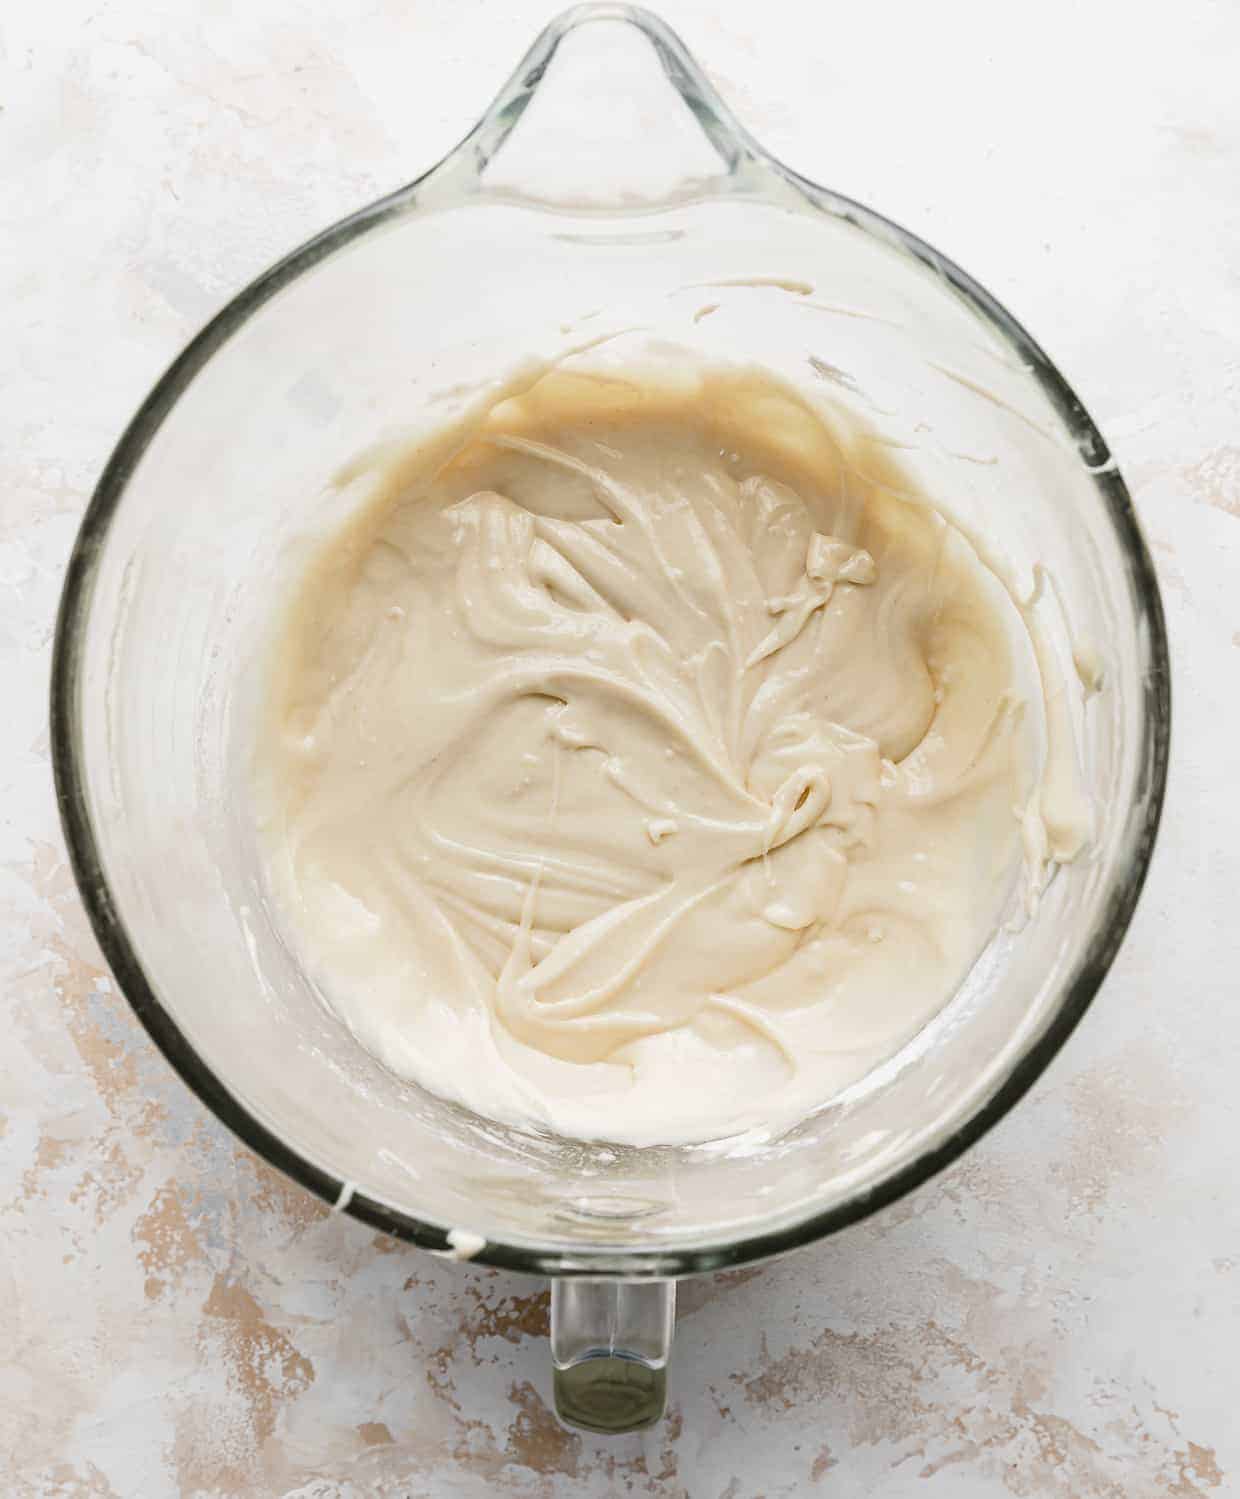 An off-white colored Smash Cake Recipe cake batter in a glass mixing bowl.